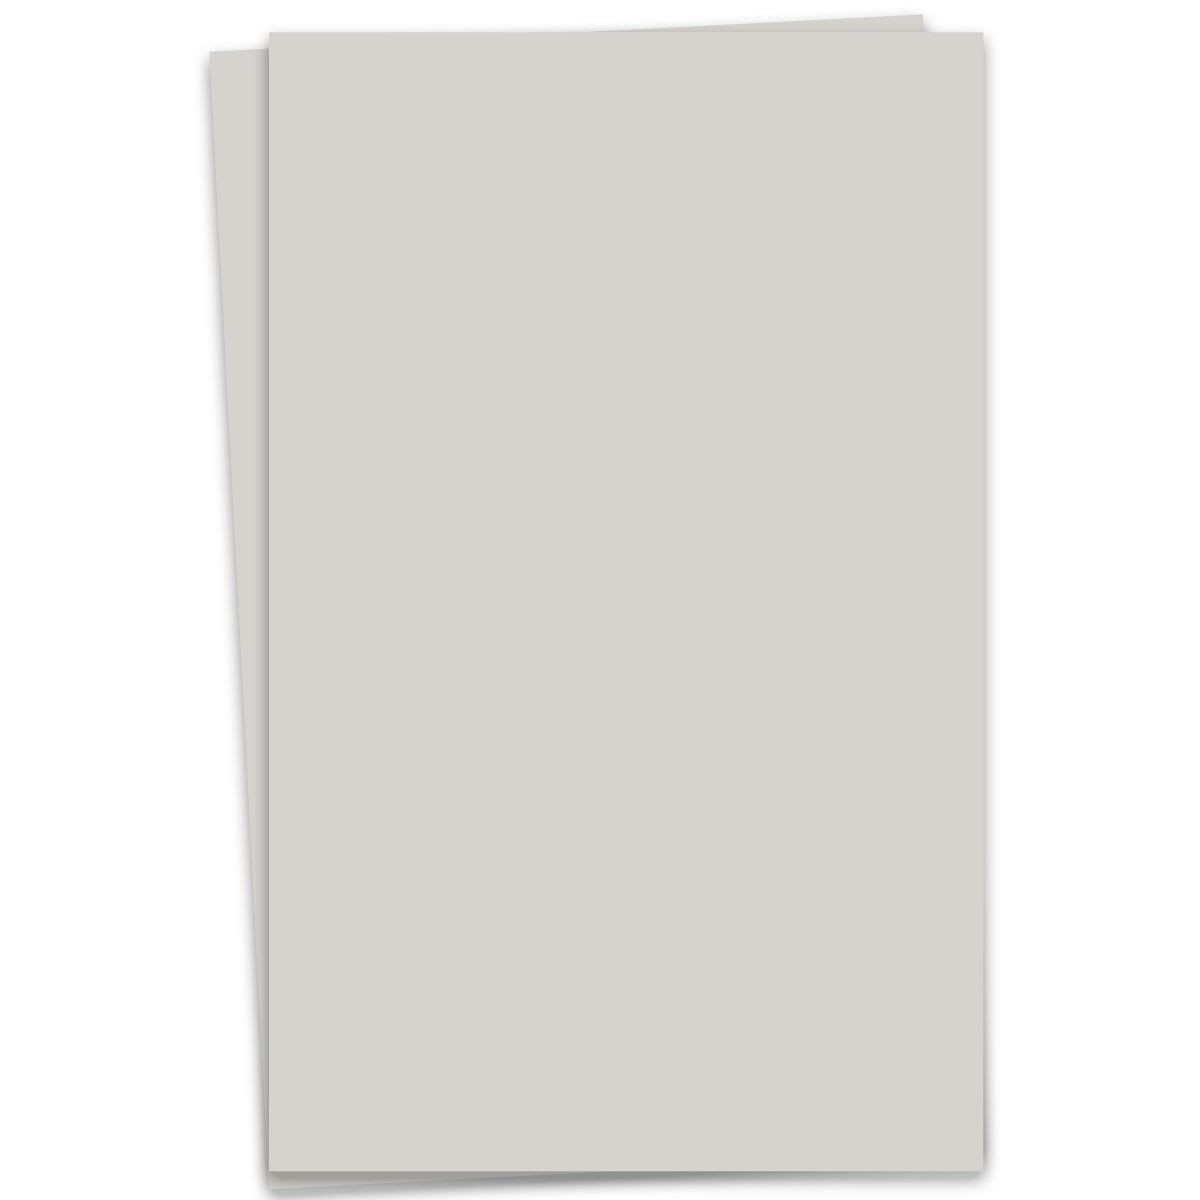 REMAKE Blue Sky - 12X12 Card Stock Paper - 92lb Cover (250gsm) - 100 PK -at